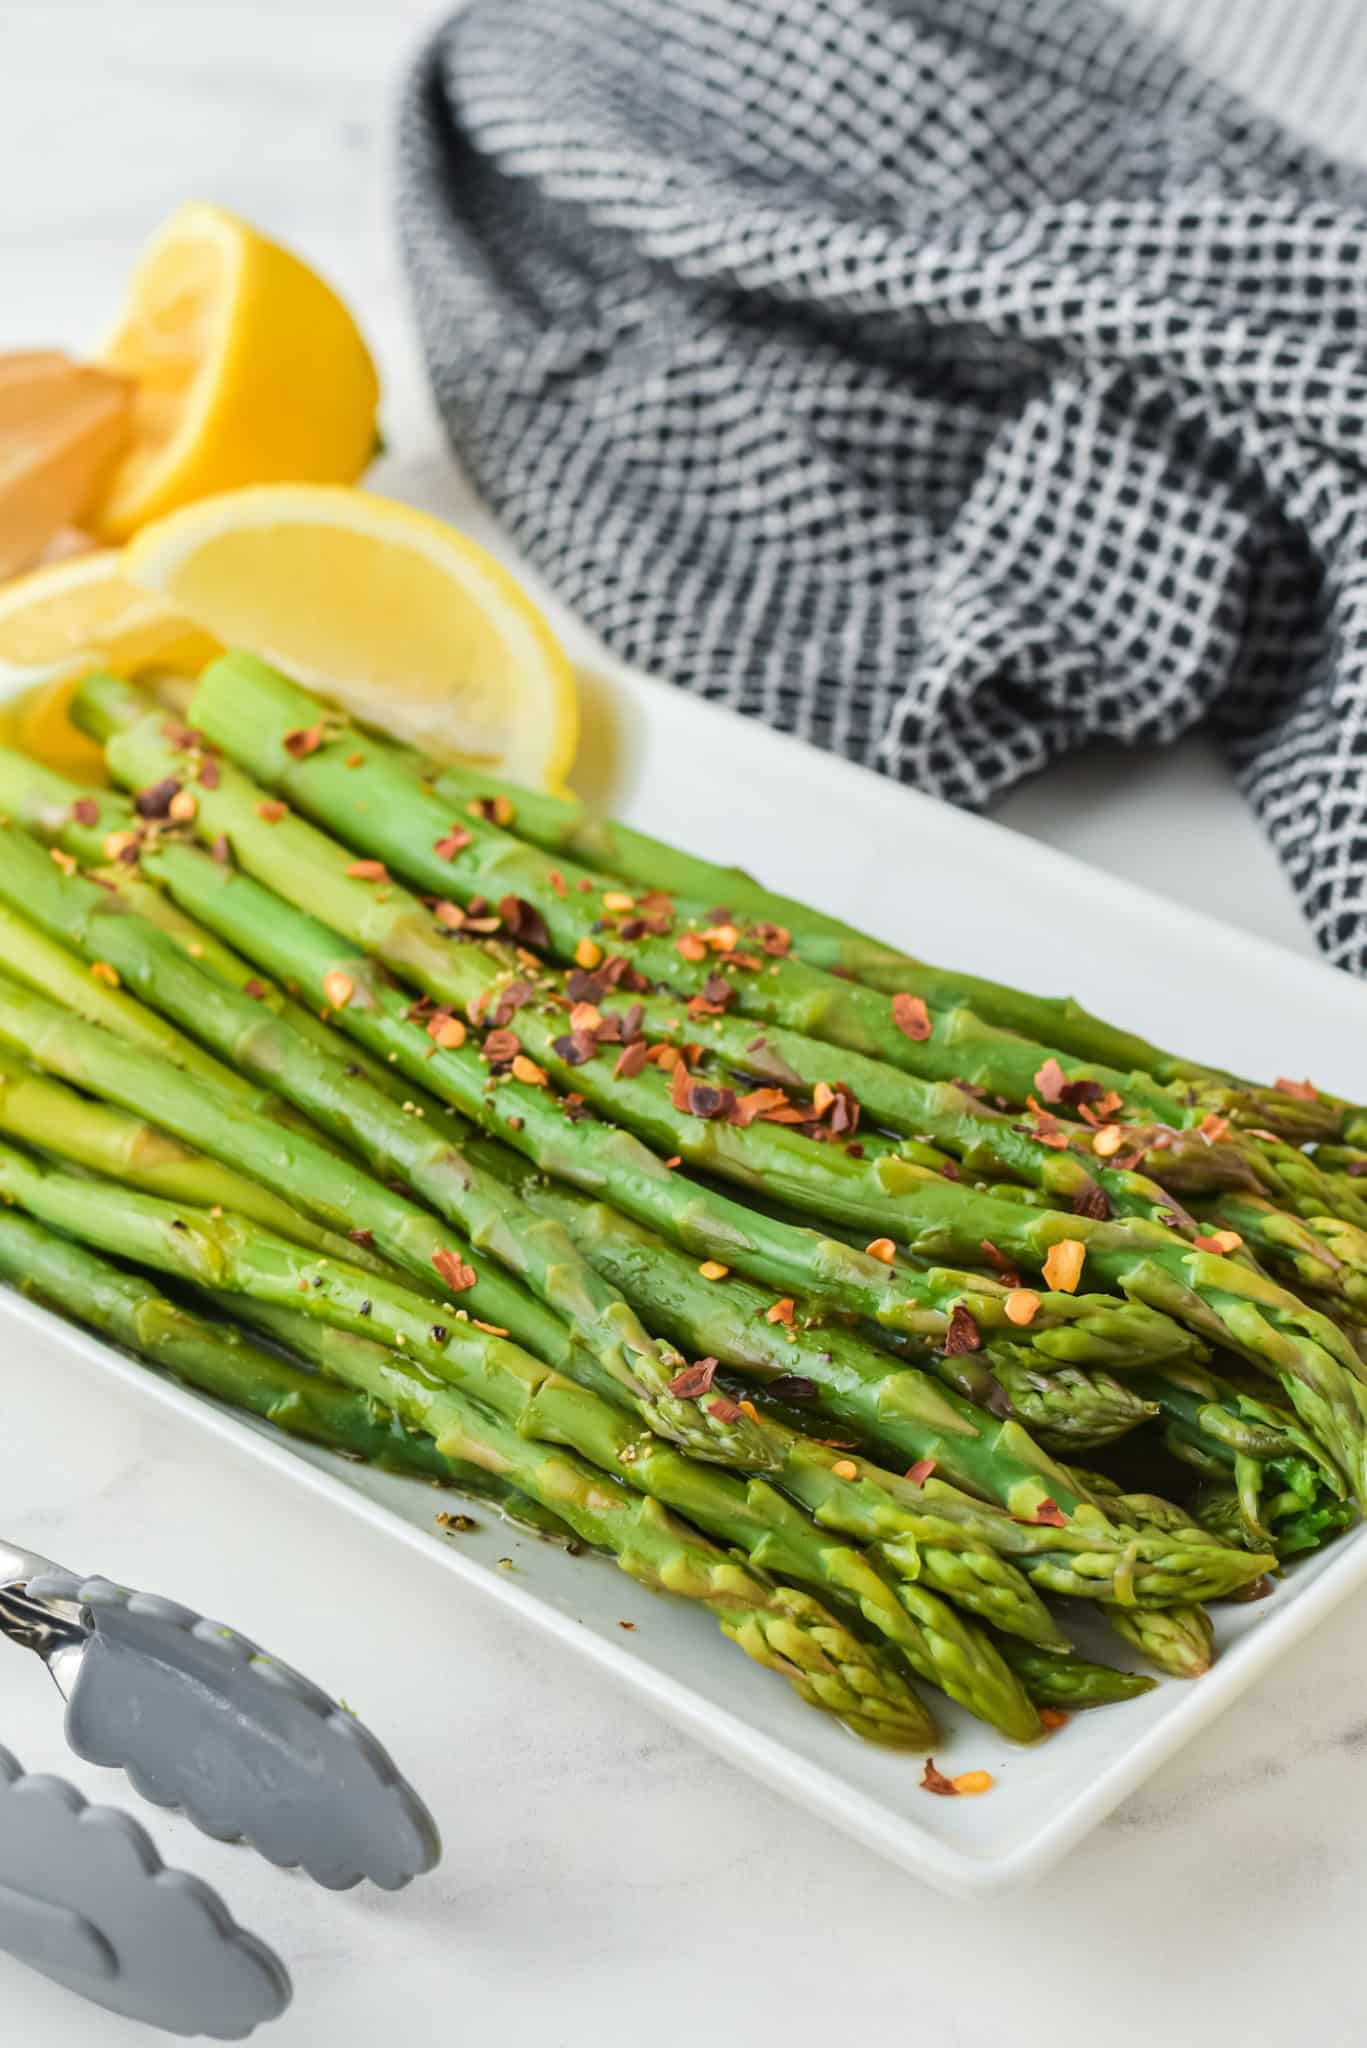 Red chili flakes sprinkled on asparagus spears on a white platter.